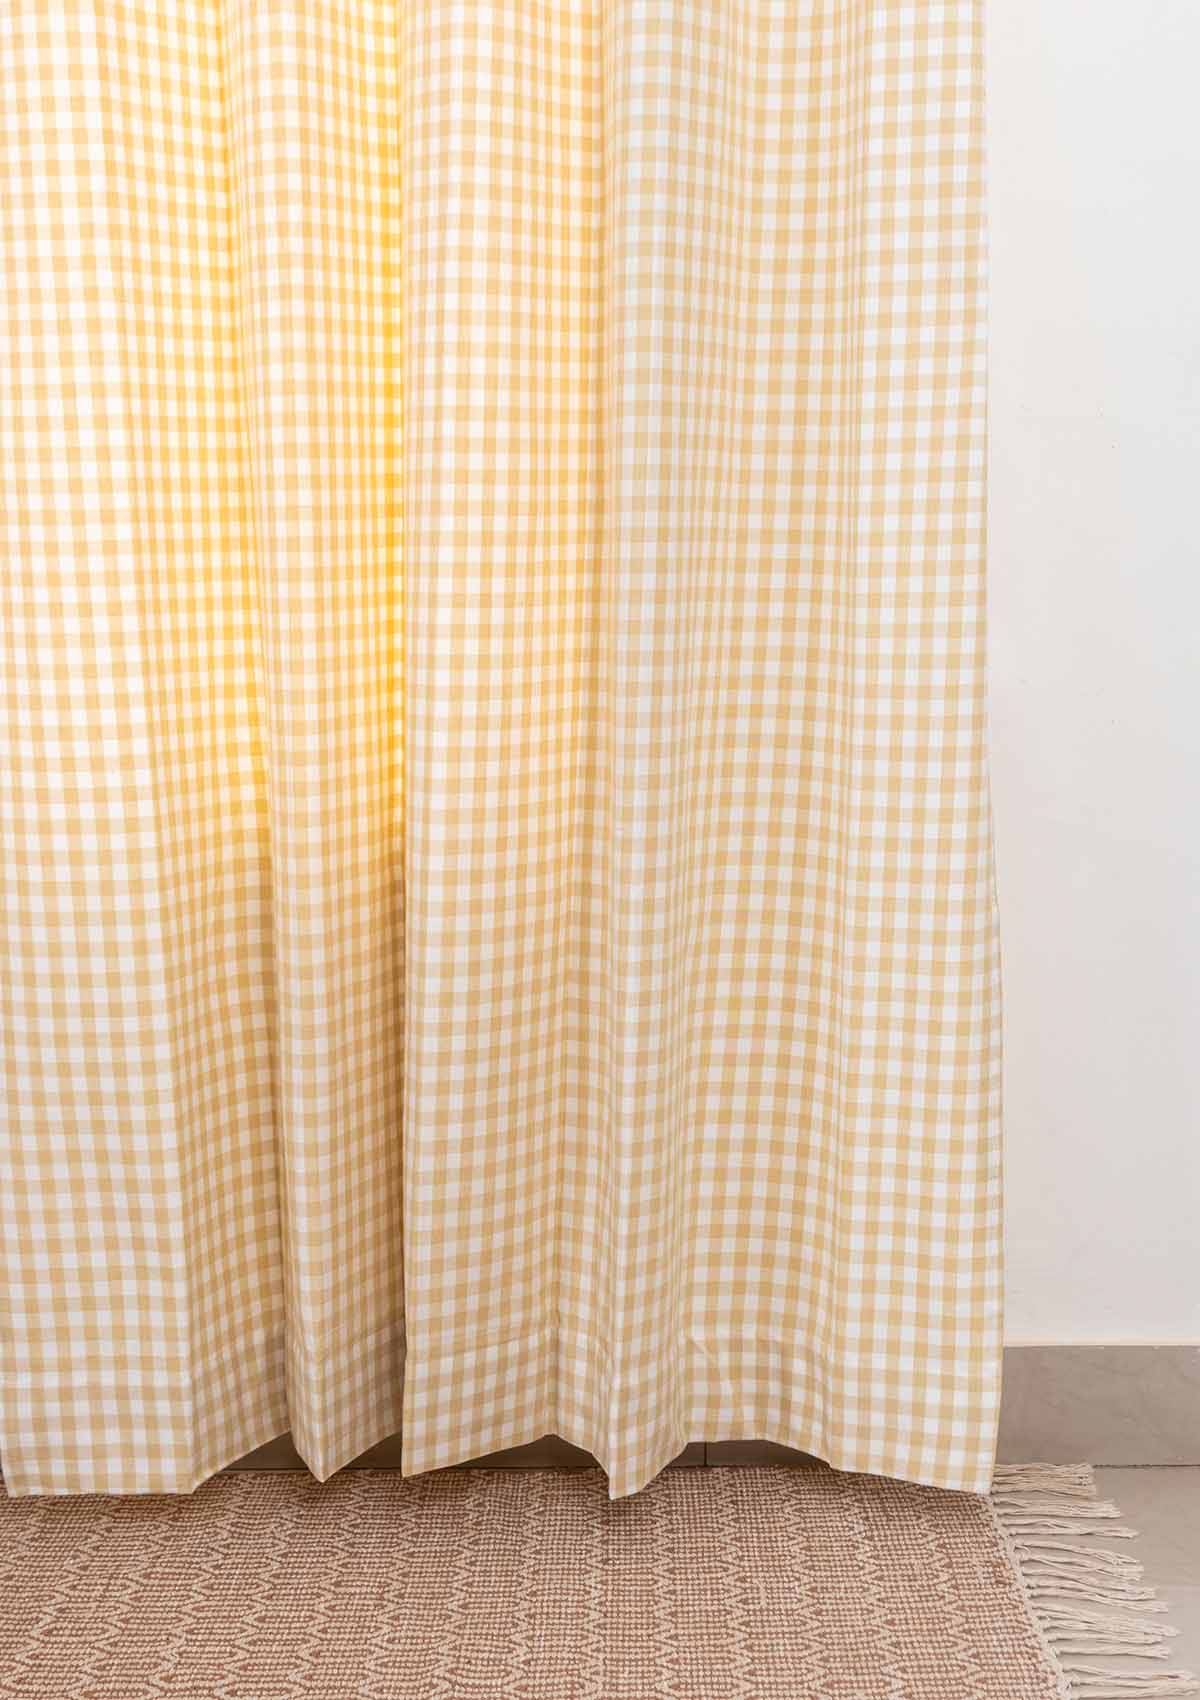 Gingham Woven 100% cotton geometric curtain for living room - Room darkening - Ivory - Pack of 1